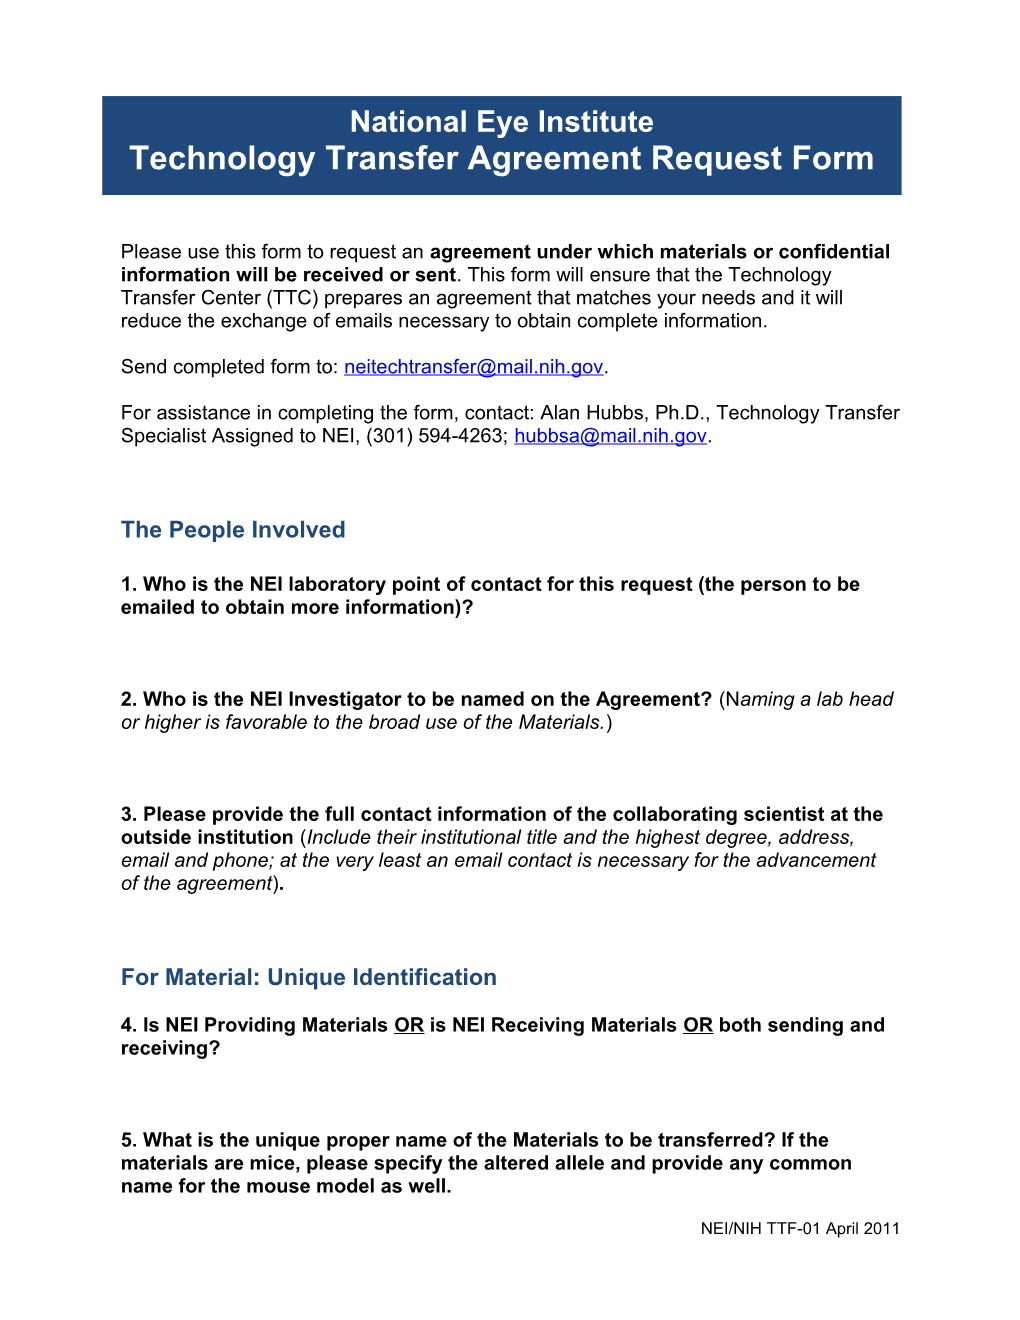 Agreement Request Form